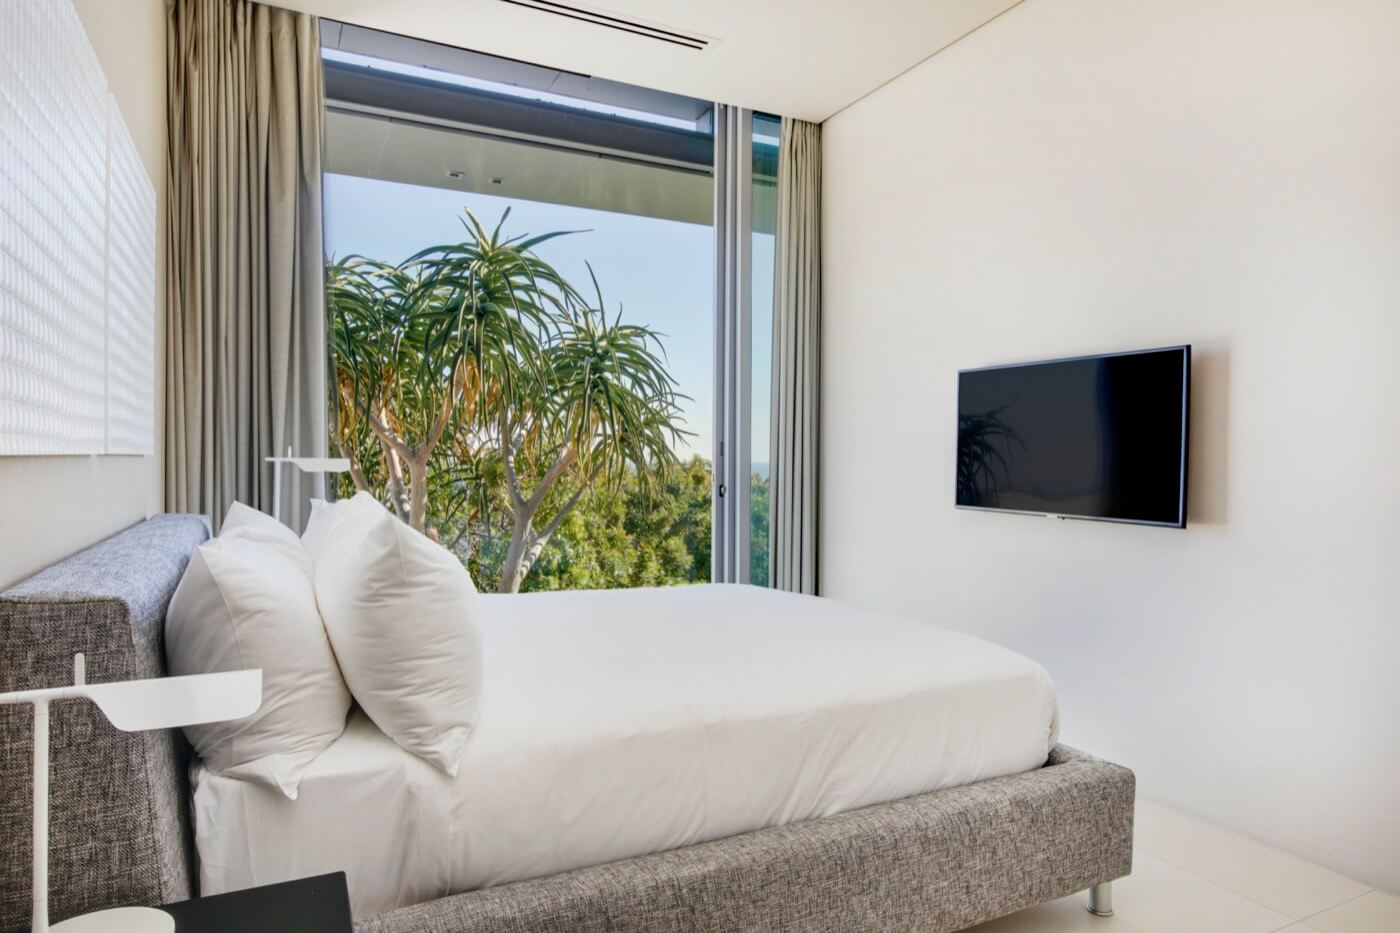 Photo 12 of The Crescent accommodation in Camps Bay, Cape Town with 6 bedrooms and 6.5 bathrooms